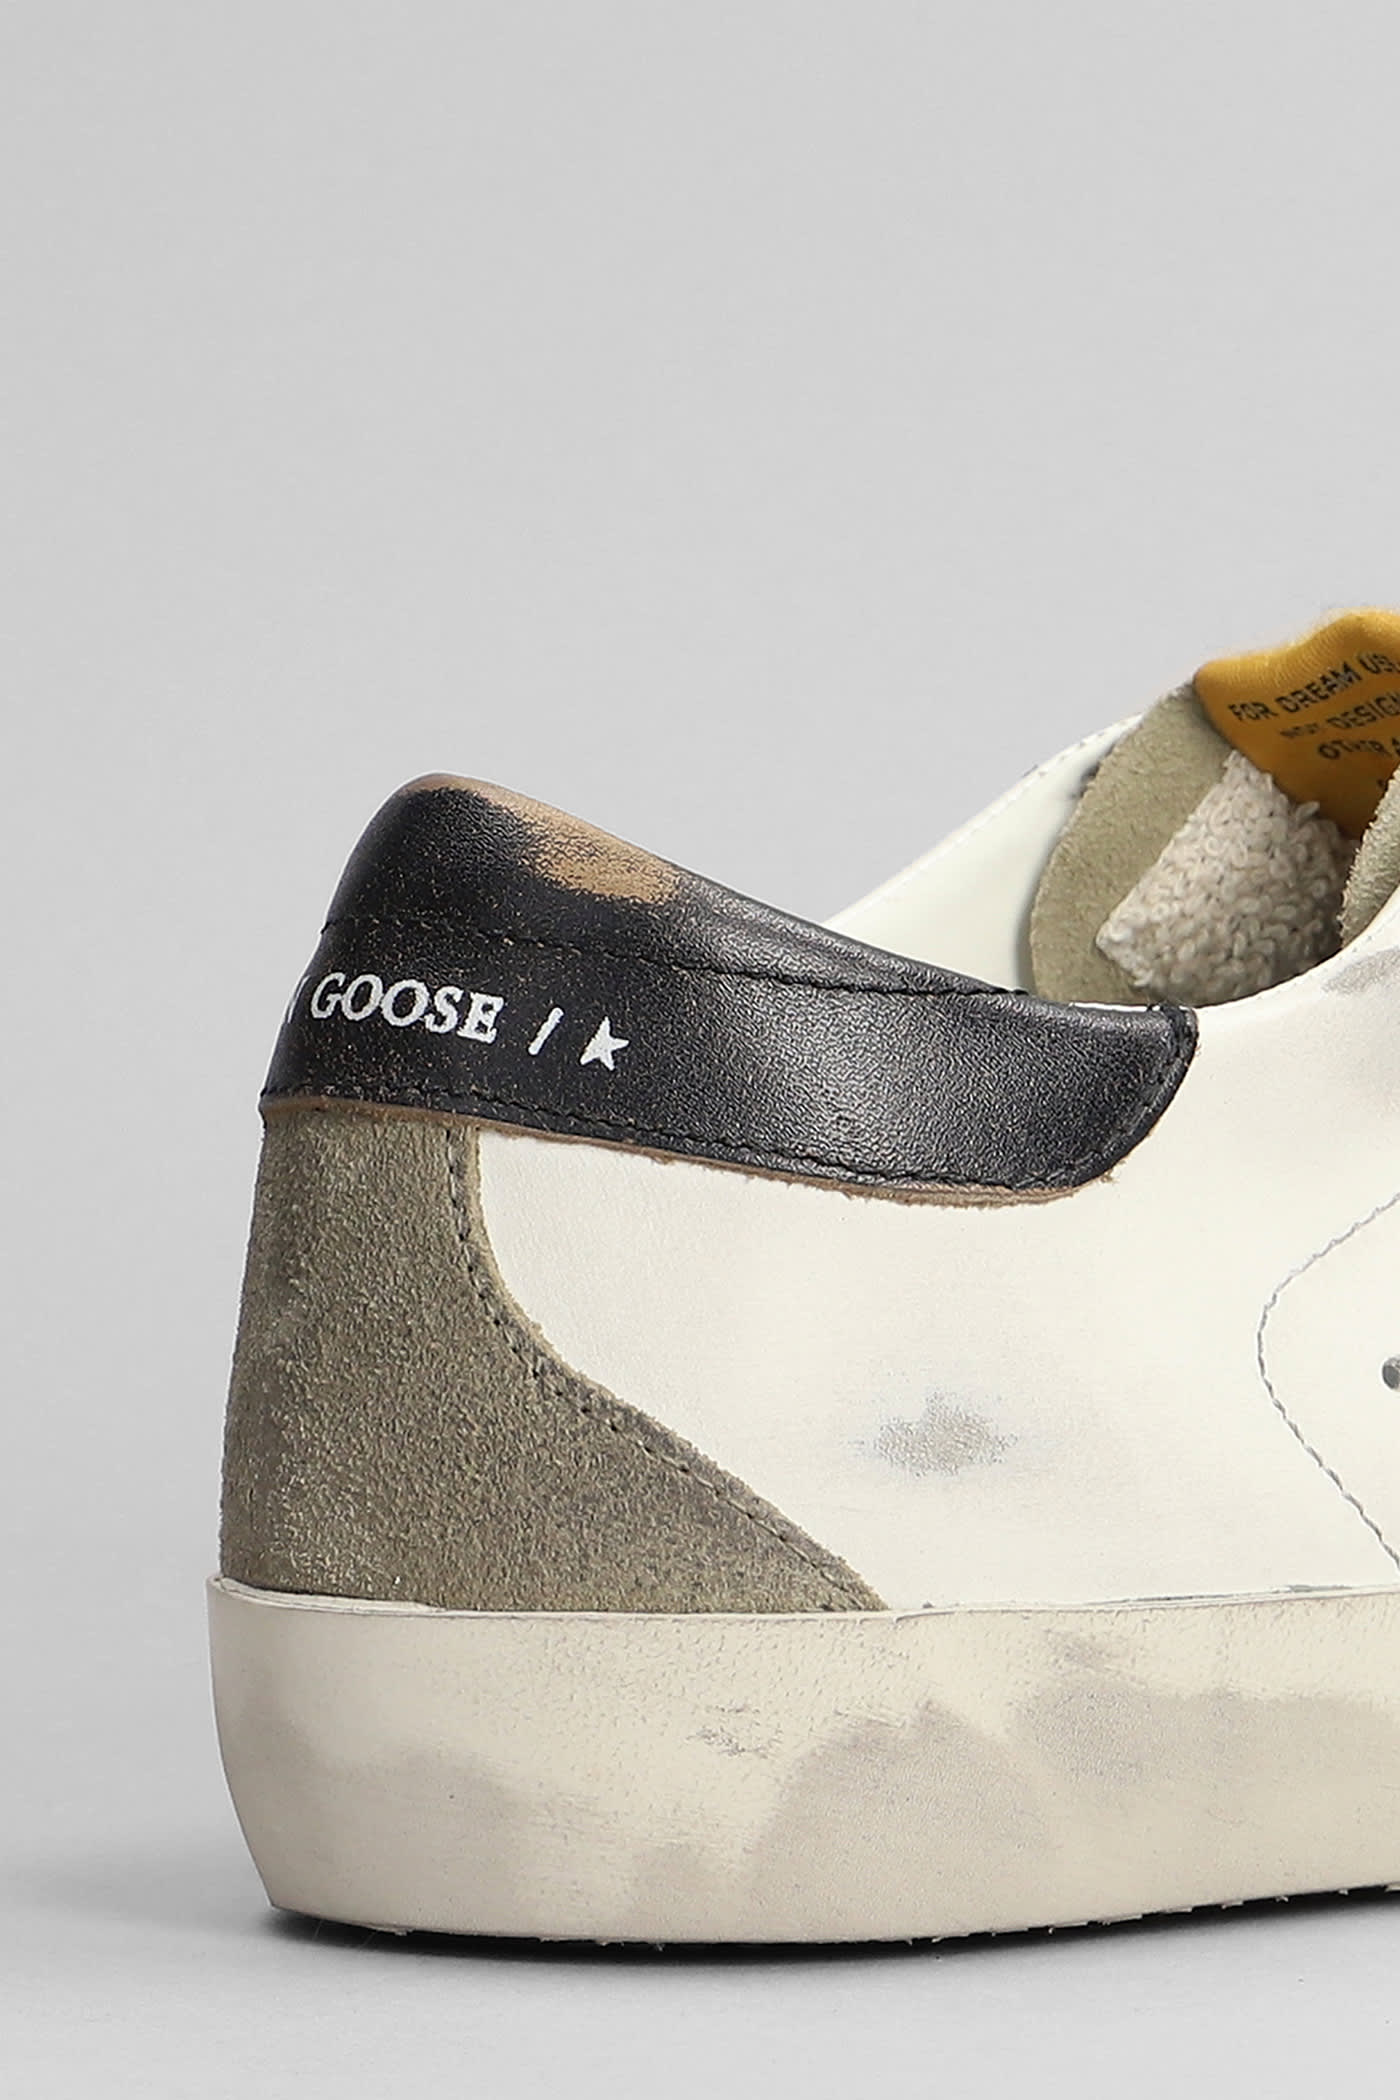 Shop Golden Goose Superstar Sneakers In White Suede And Leather